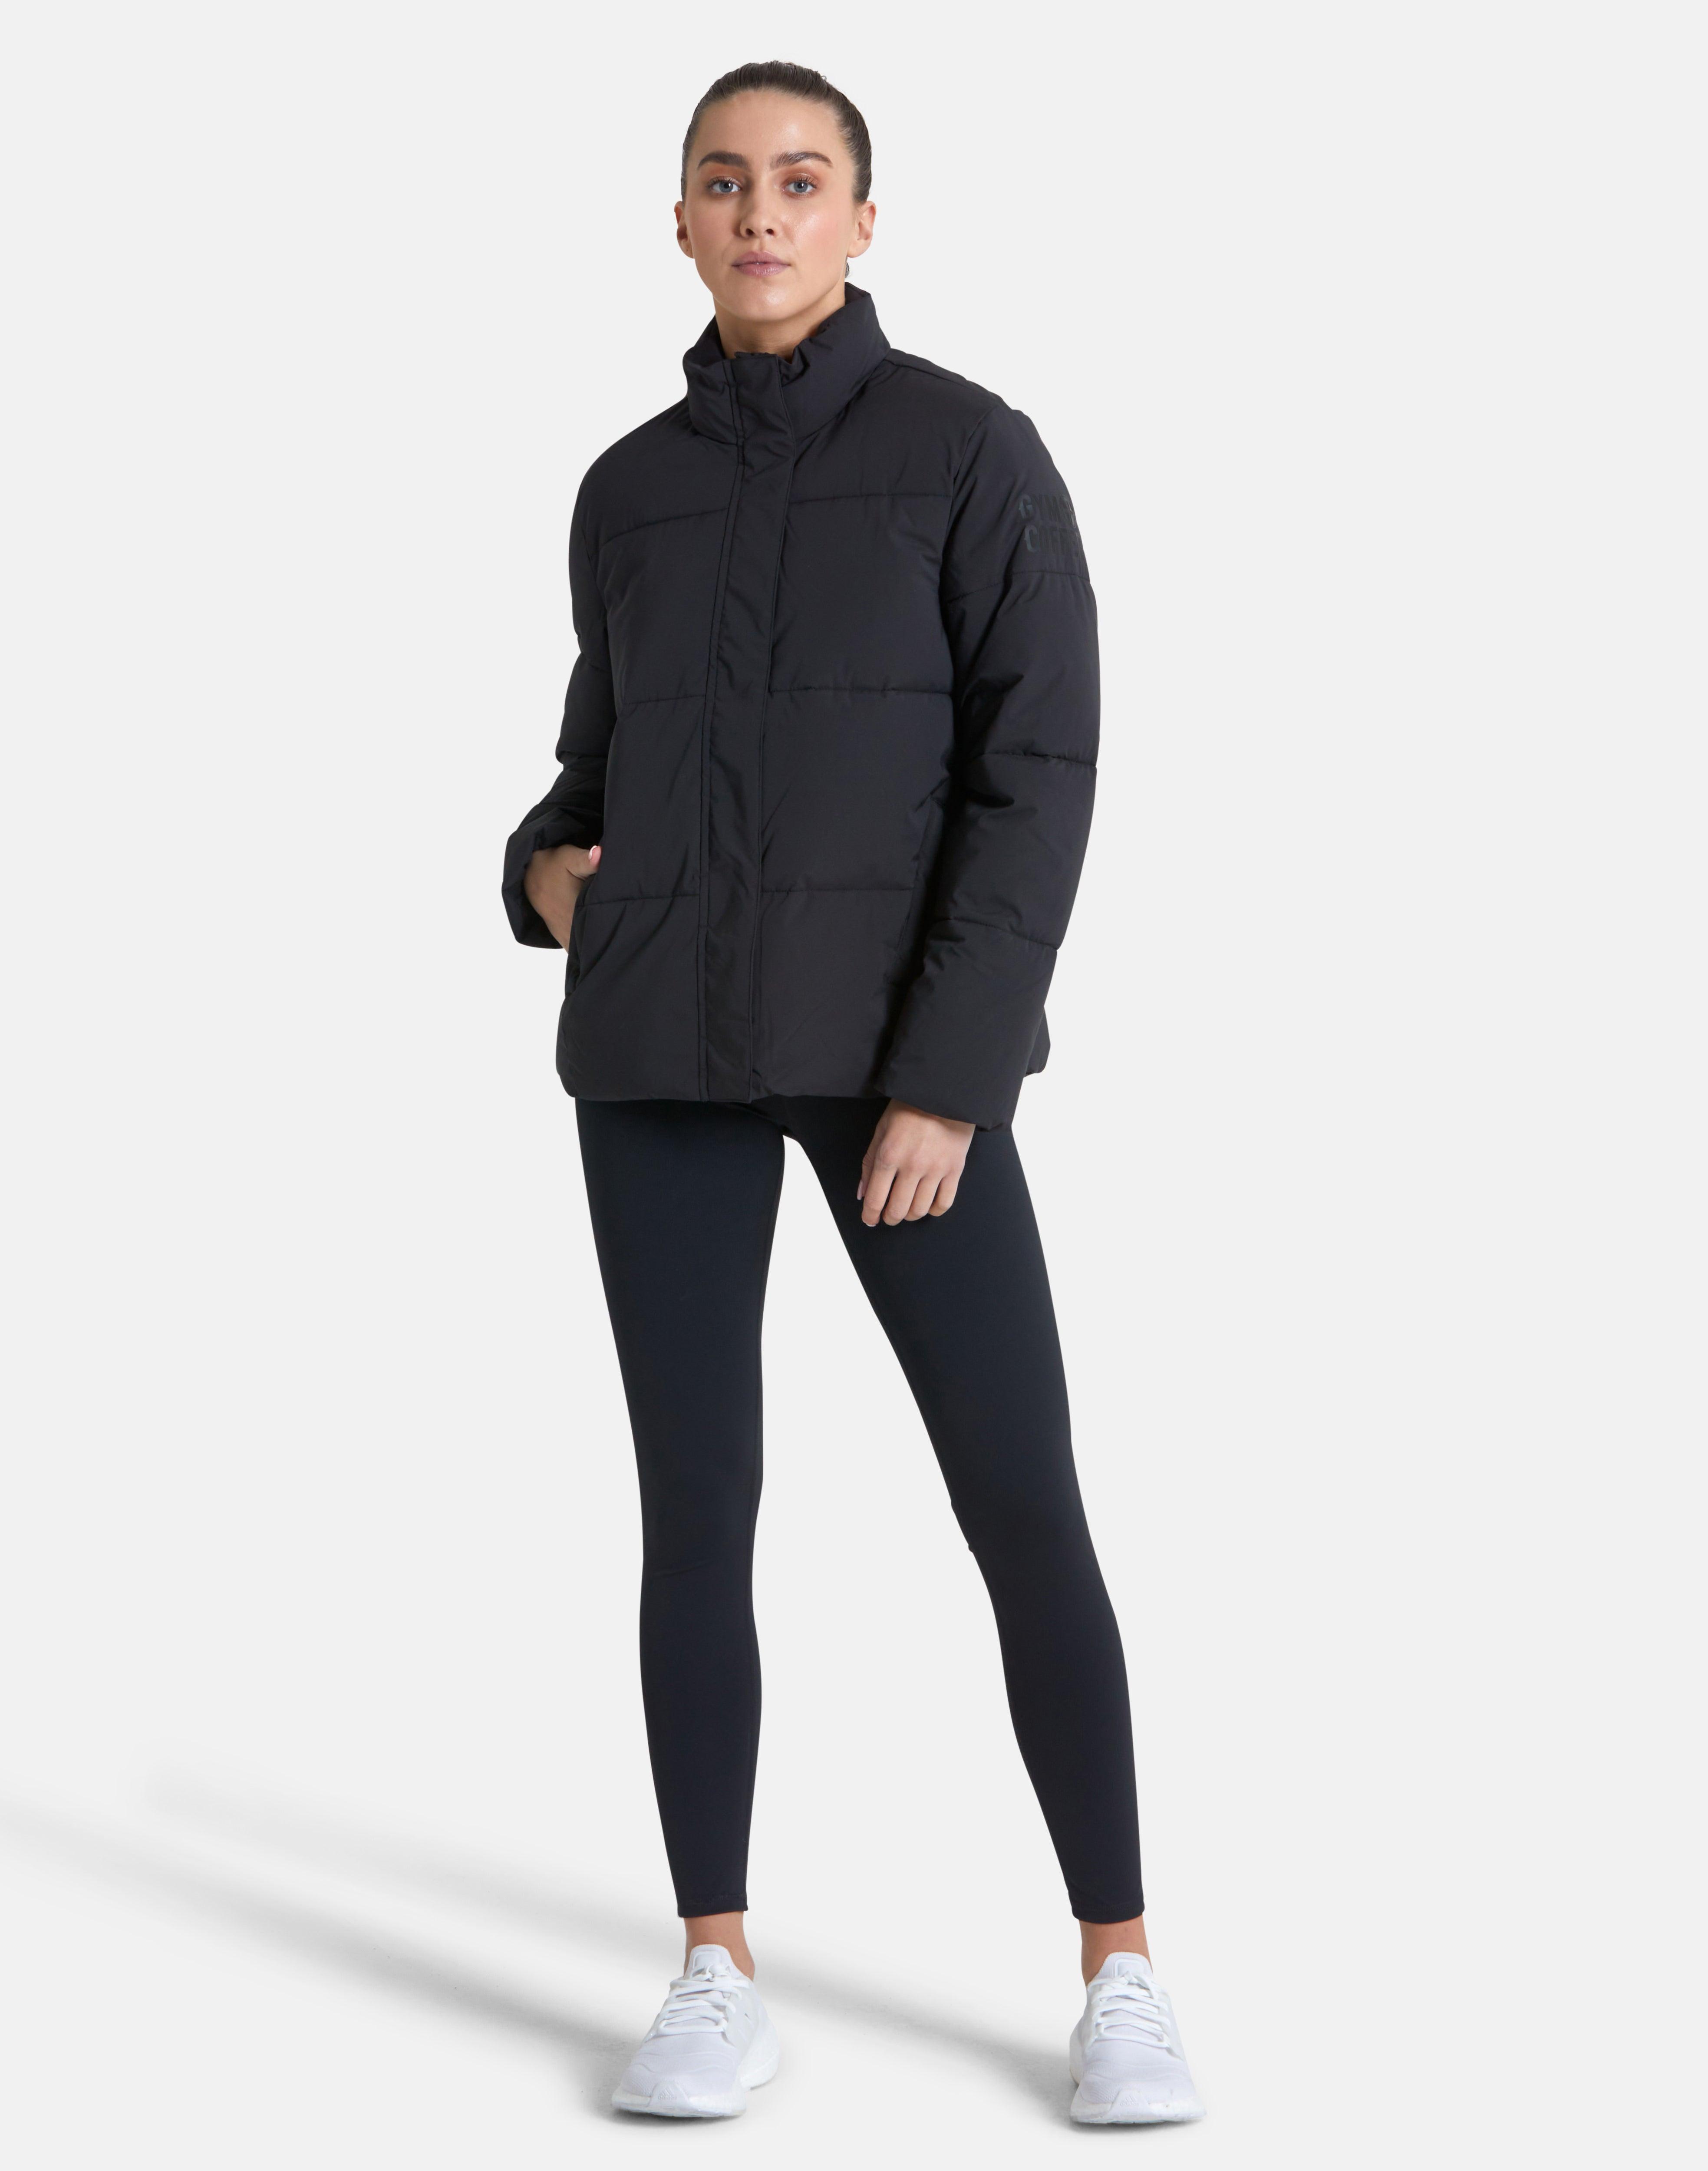 Women's Urban Expedition Puffer Jacket in Jet Black - Outerwear - Gym+Coffee